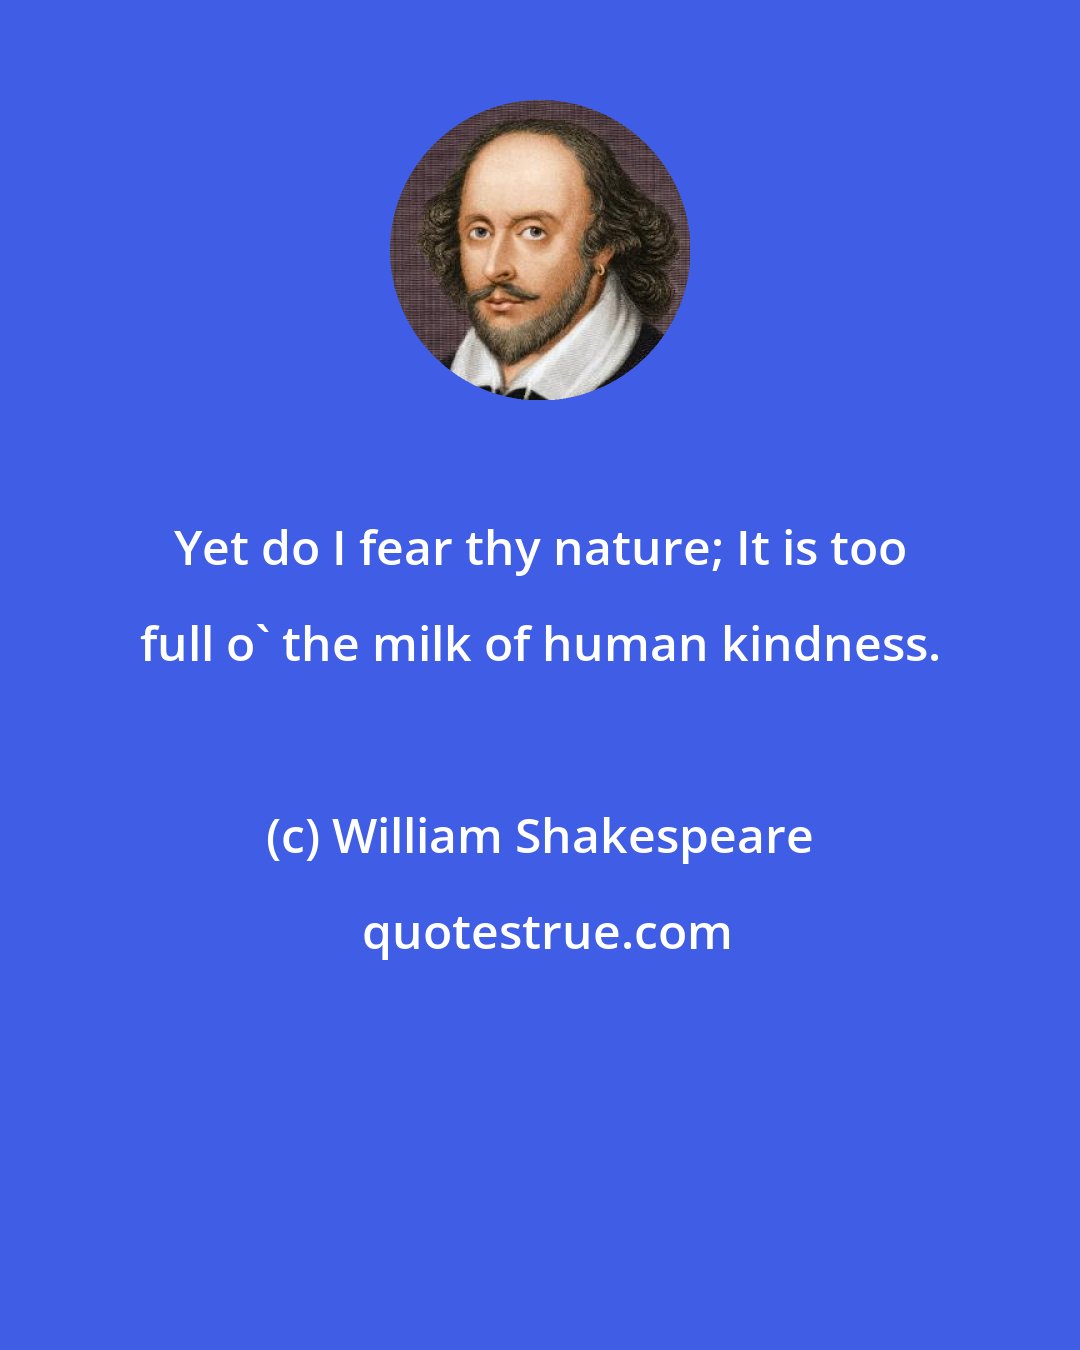 William Shakespeare: Yet do I fear thy nature; It is too full o' the milk of human kindness.